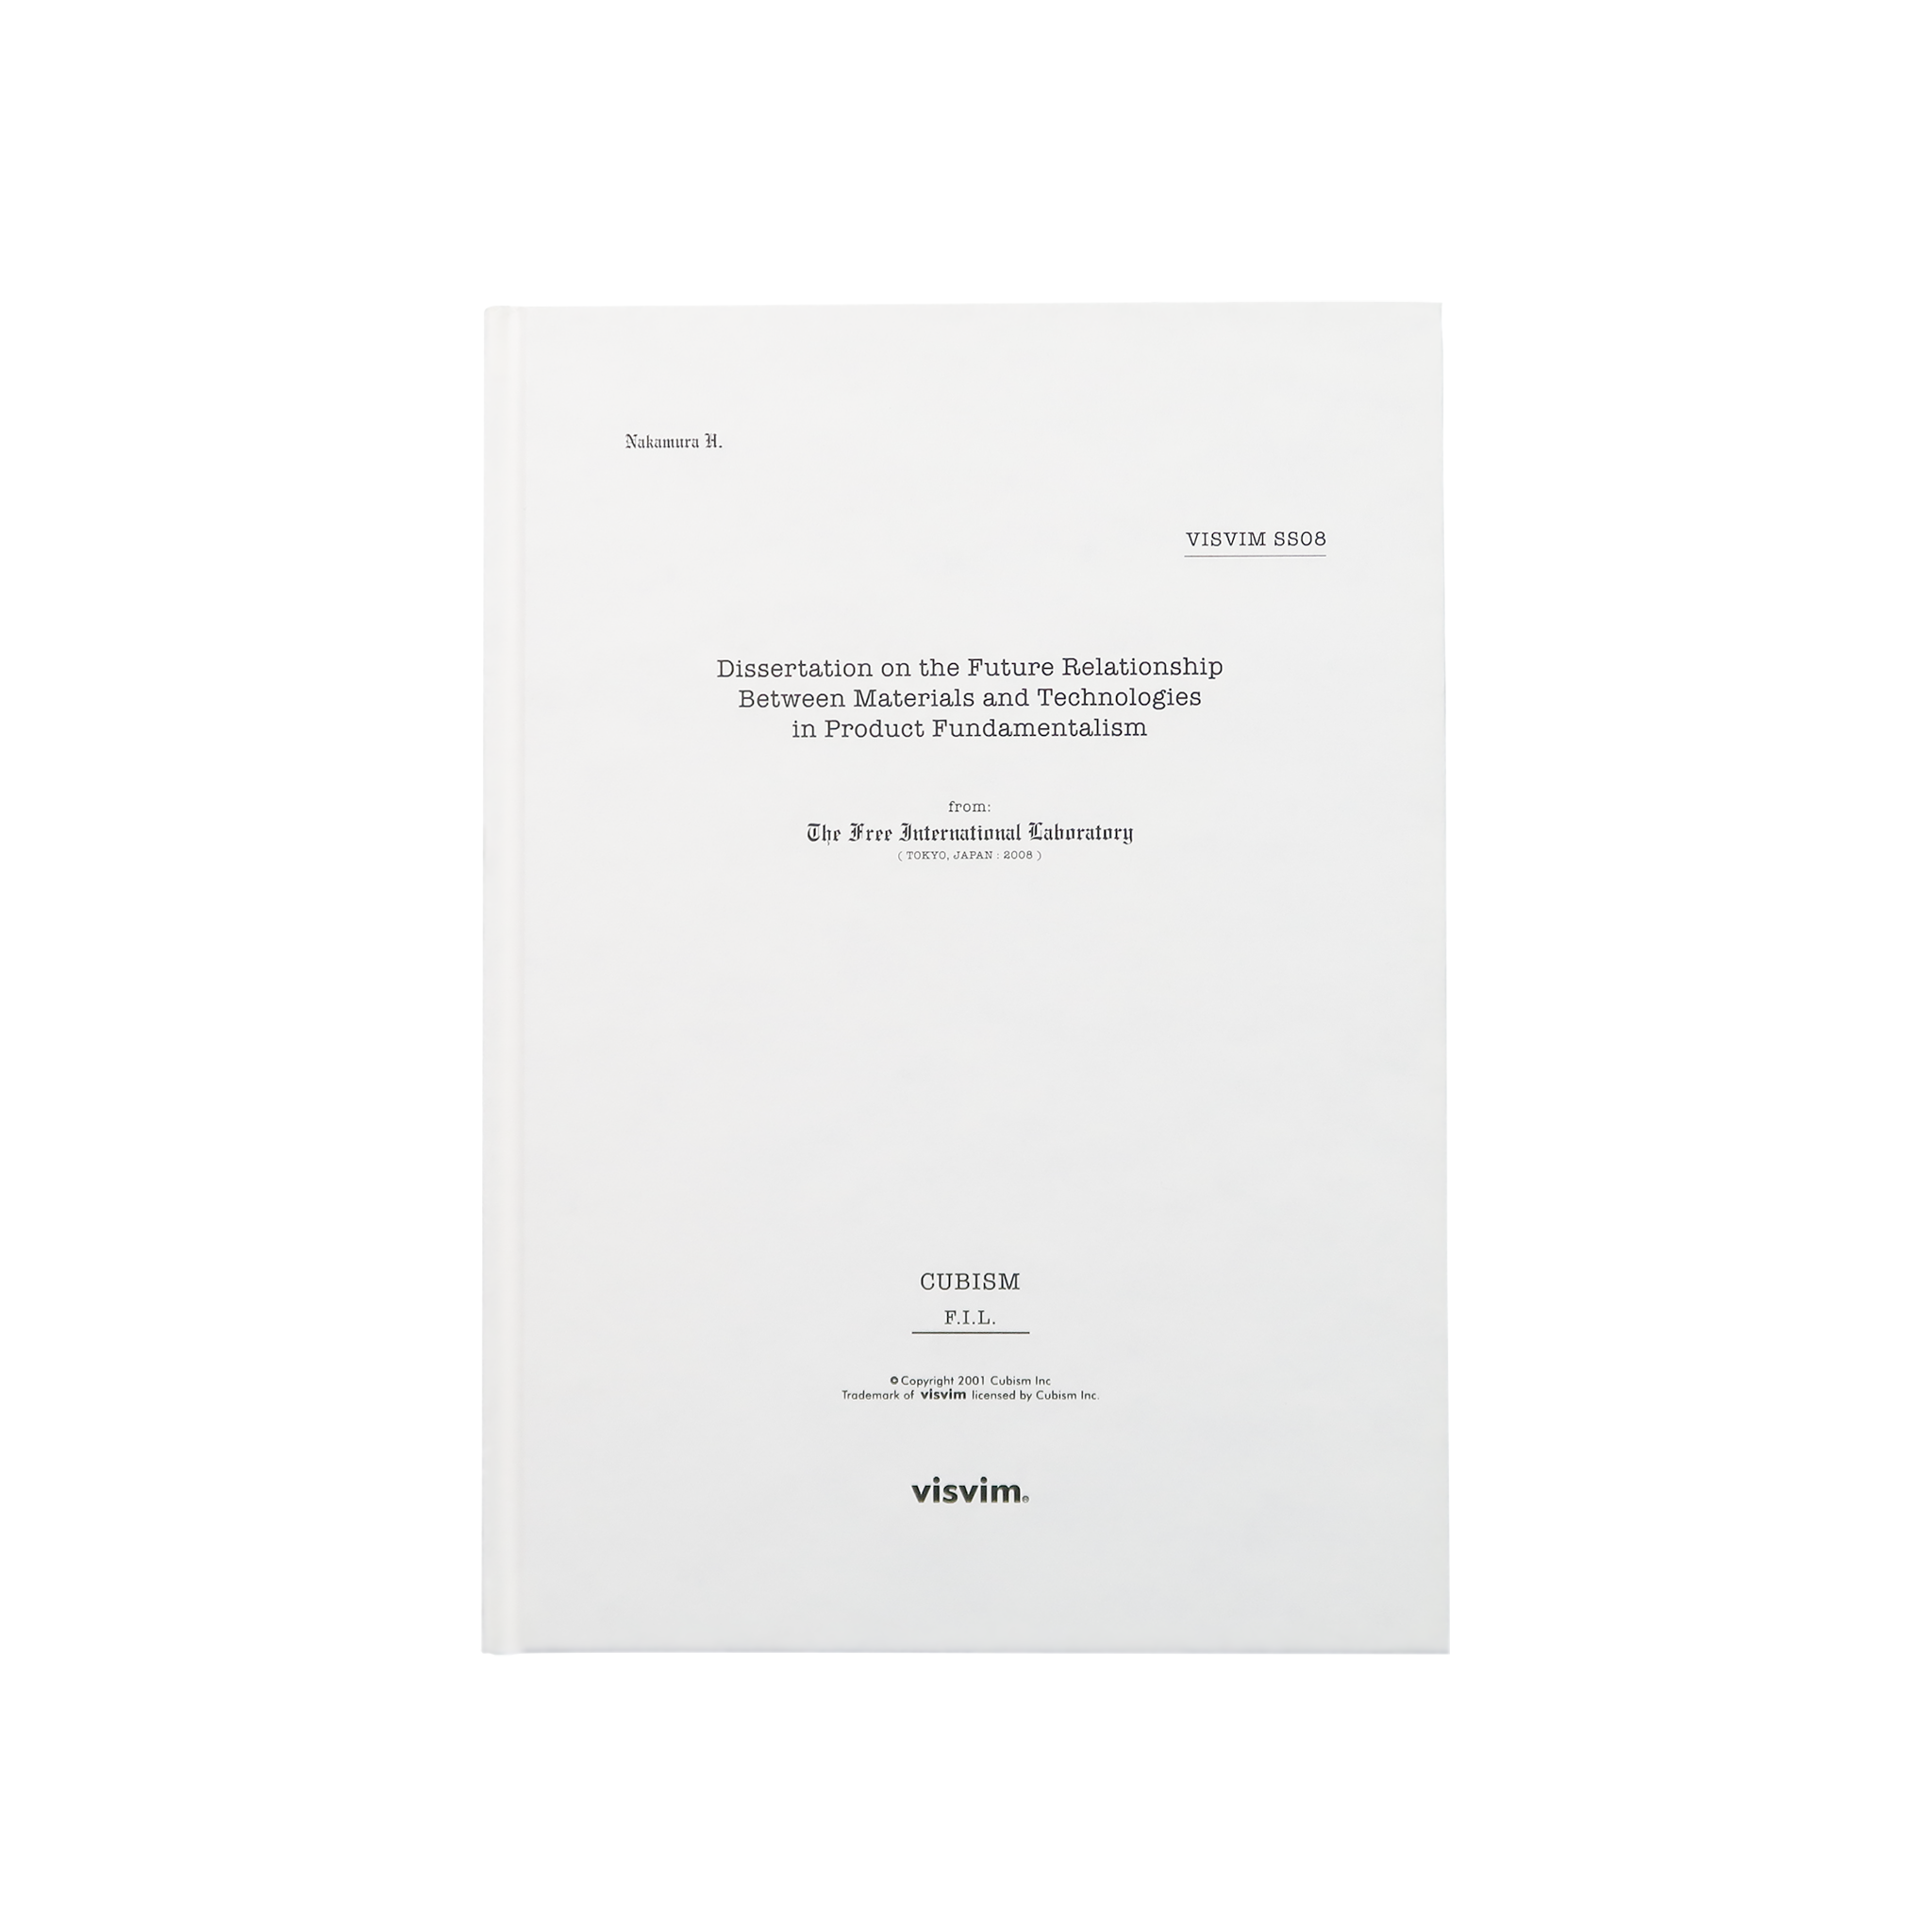 Dissertation on the Future Relationship Between Materials and Technologies in Product Fundamentalism (SS08)